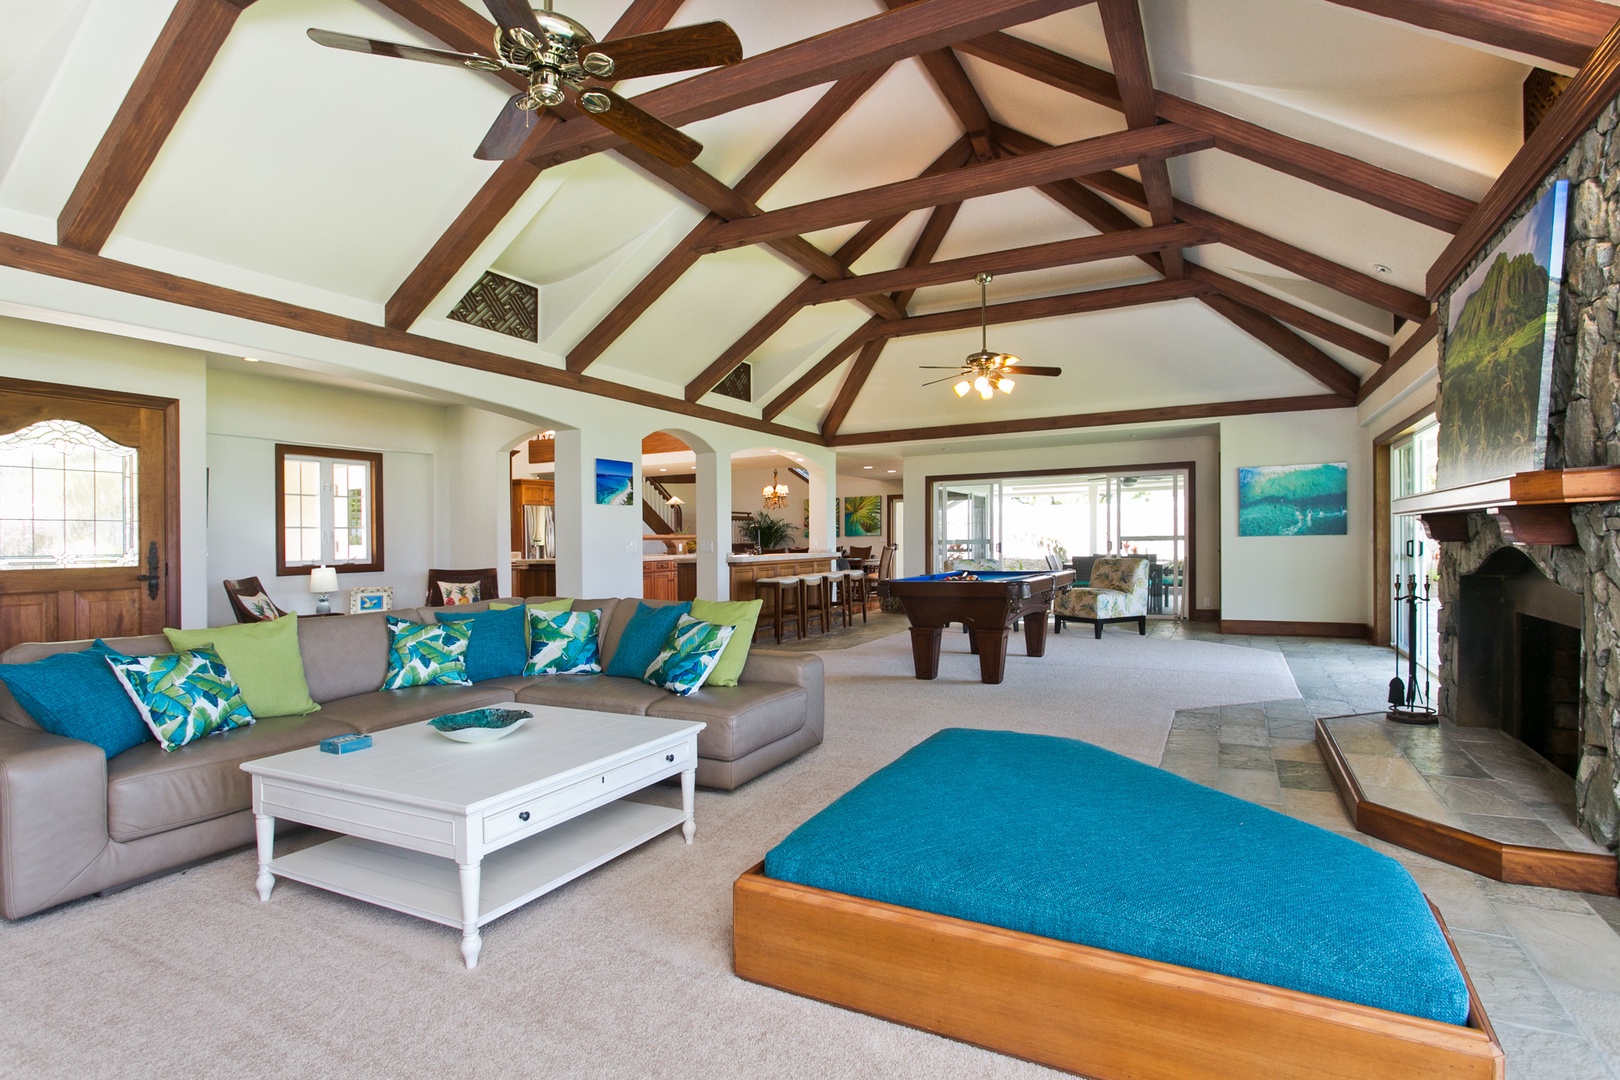 Kailua Vacation Rentals, Hale Melia* - Unwind in the heart of the home, a cozy and chic living area.